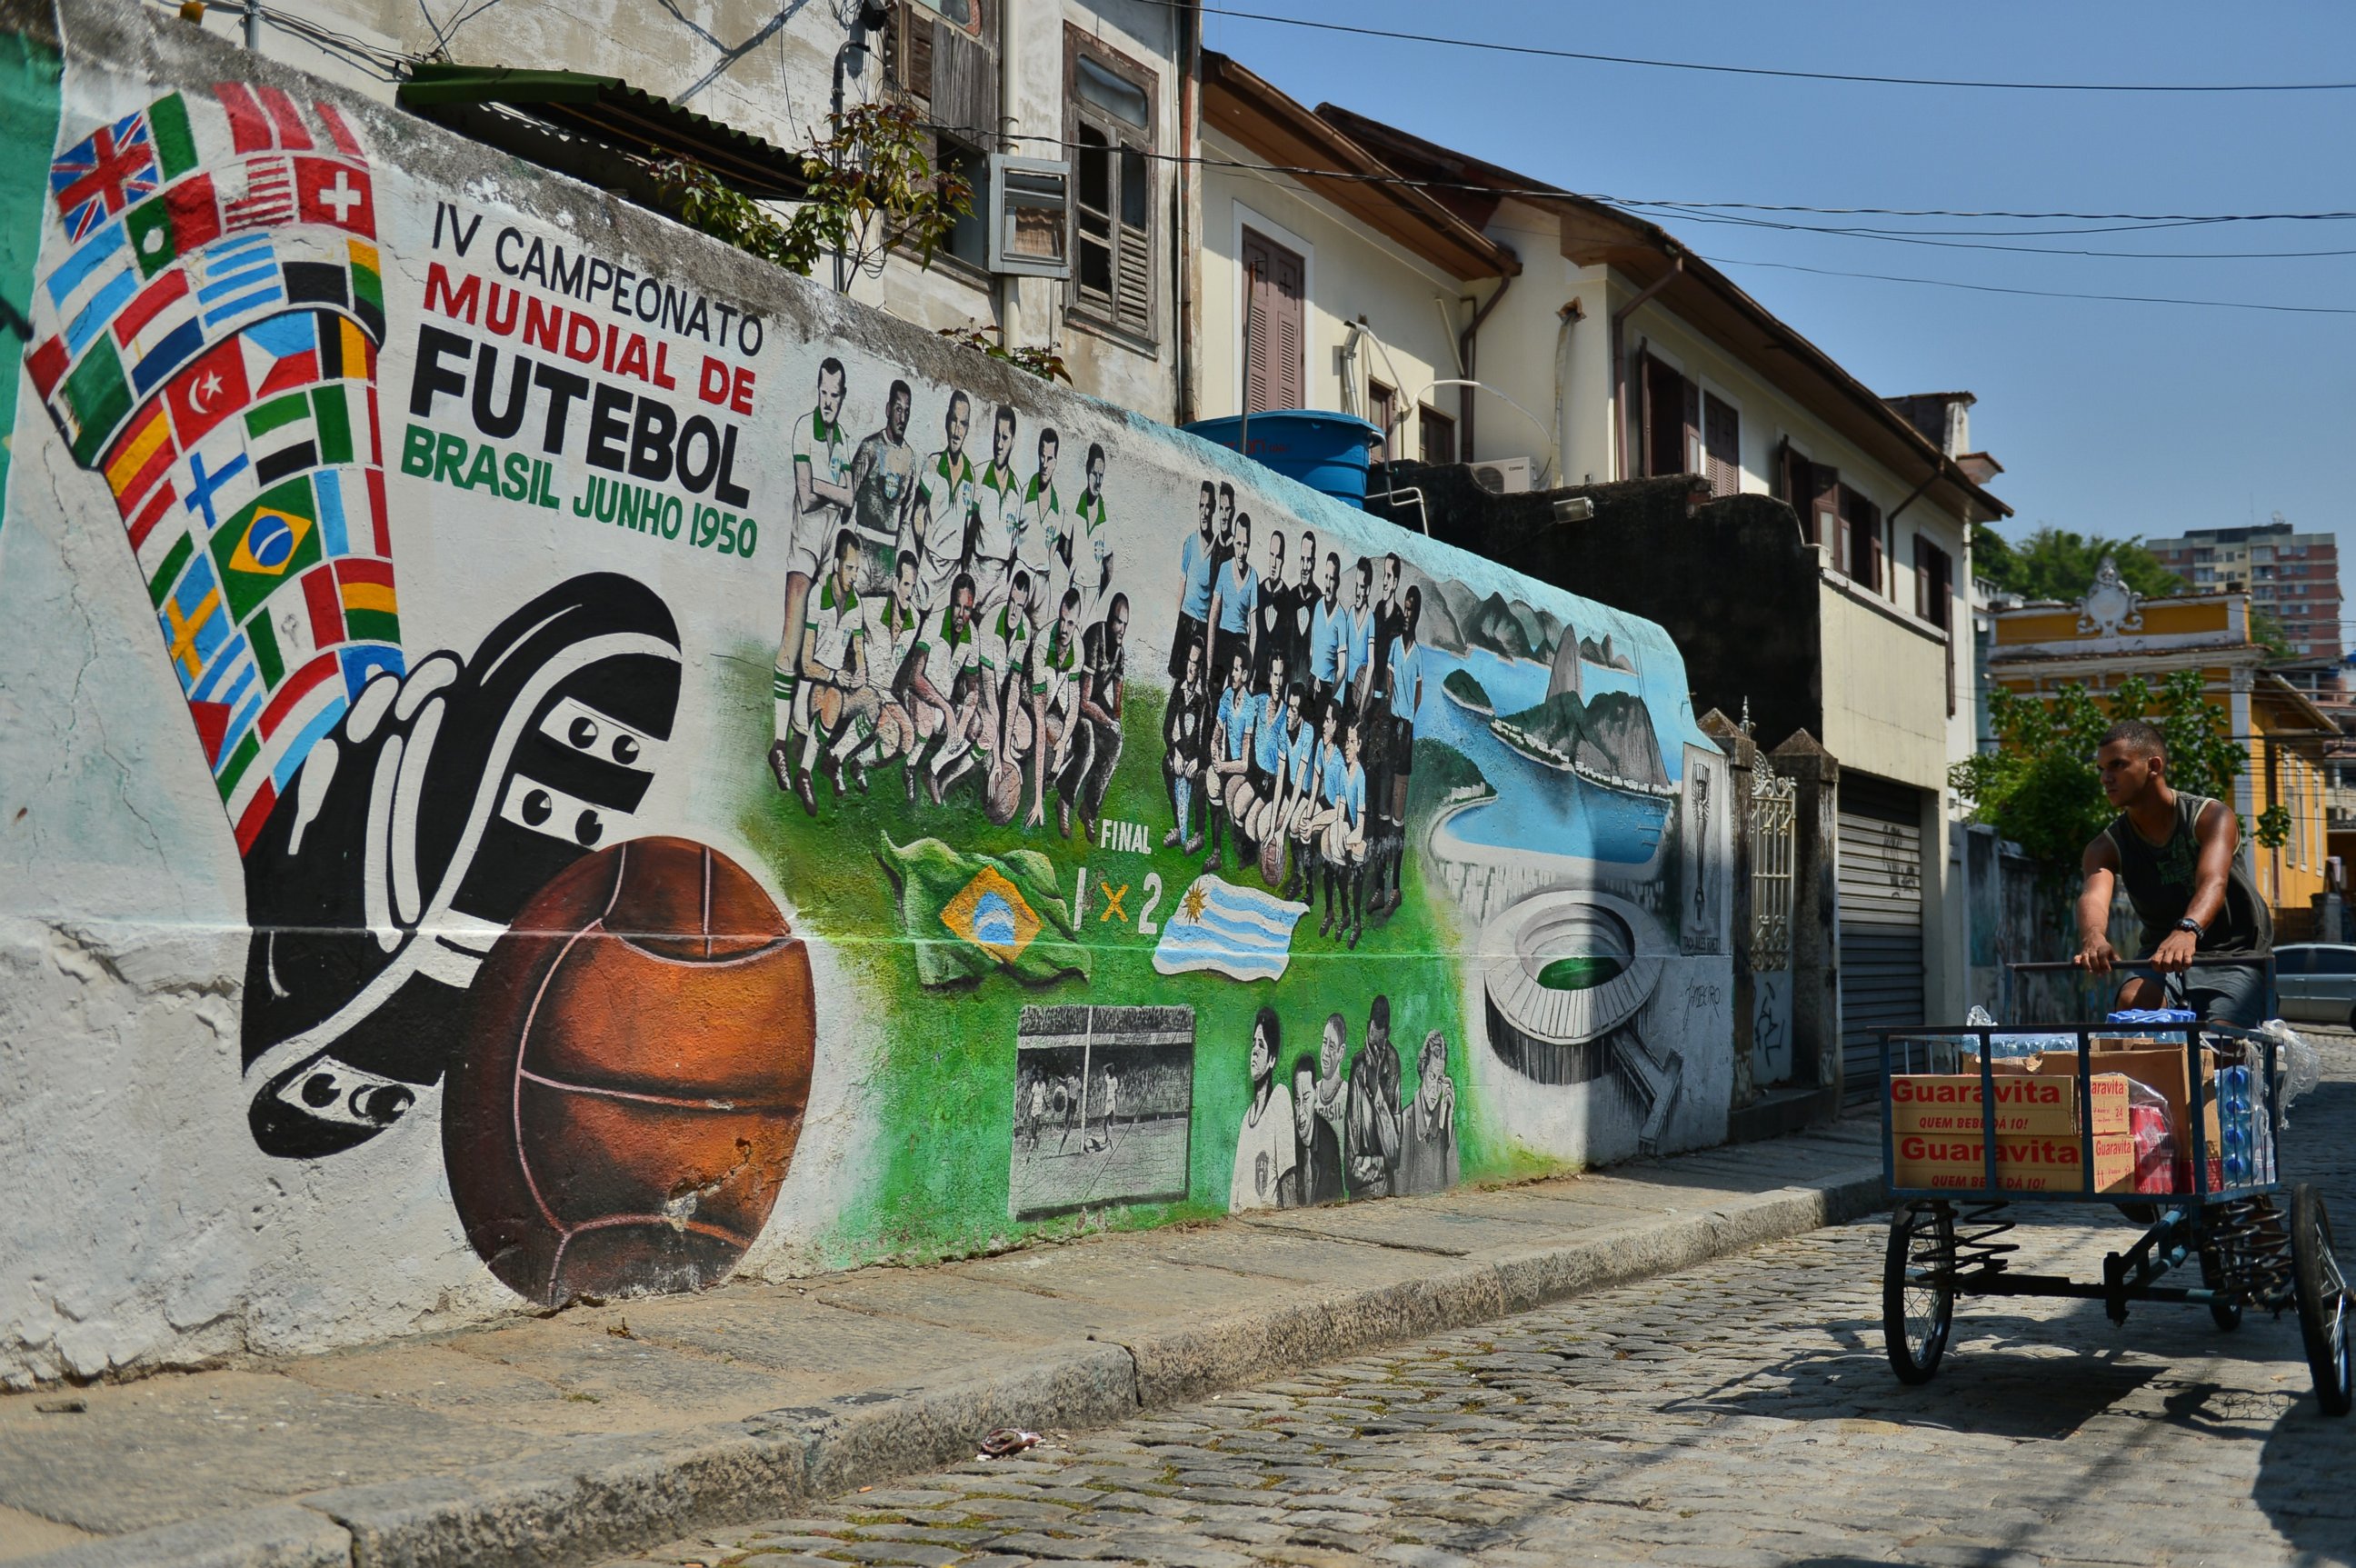 PHOTO: View of a mural paint depicting the final match of the 1950 FIFA World Cup, Brazil vs Uruguay, in Rio de Janeiro on April 8, 2014, Brazil. 